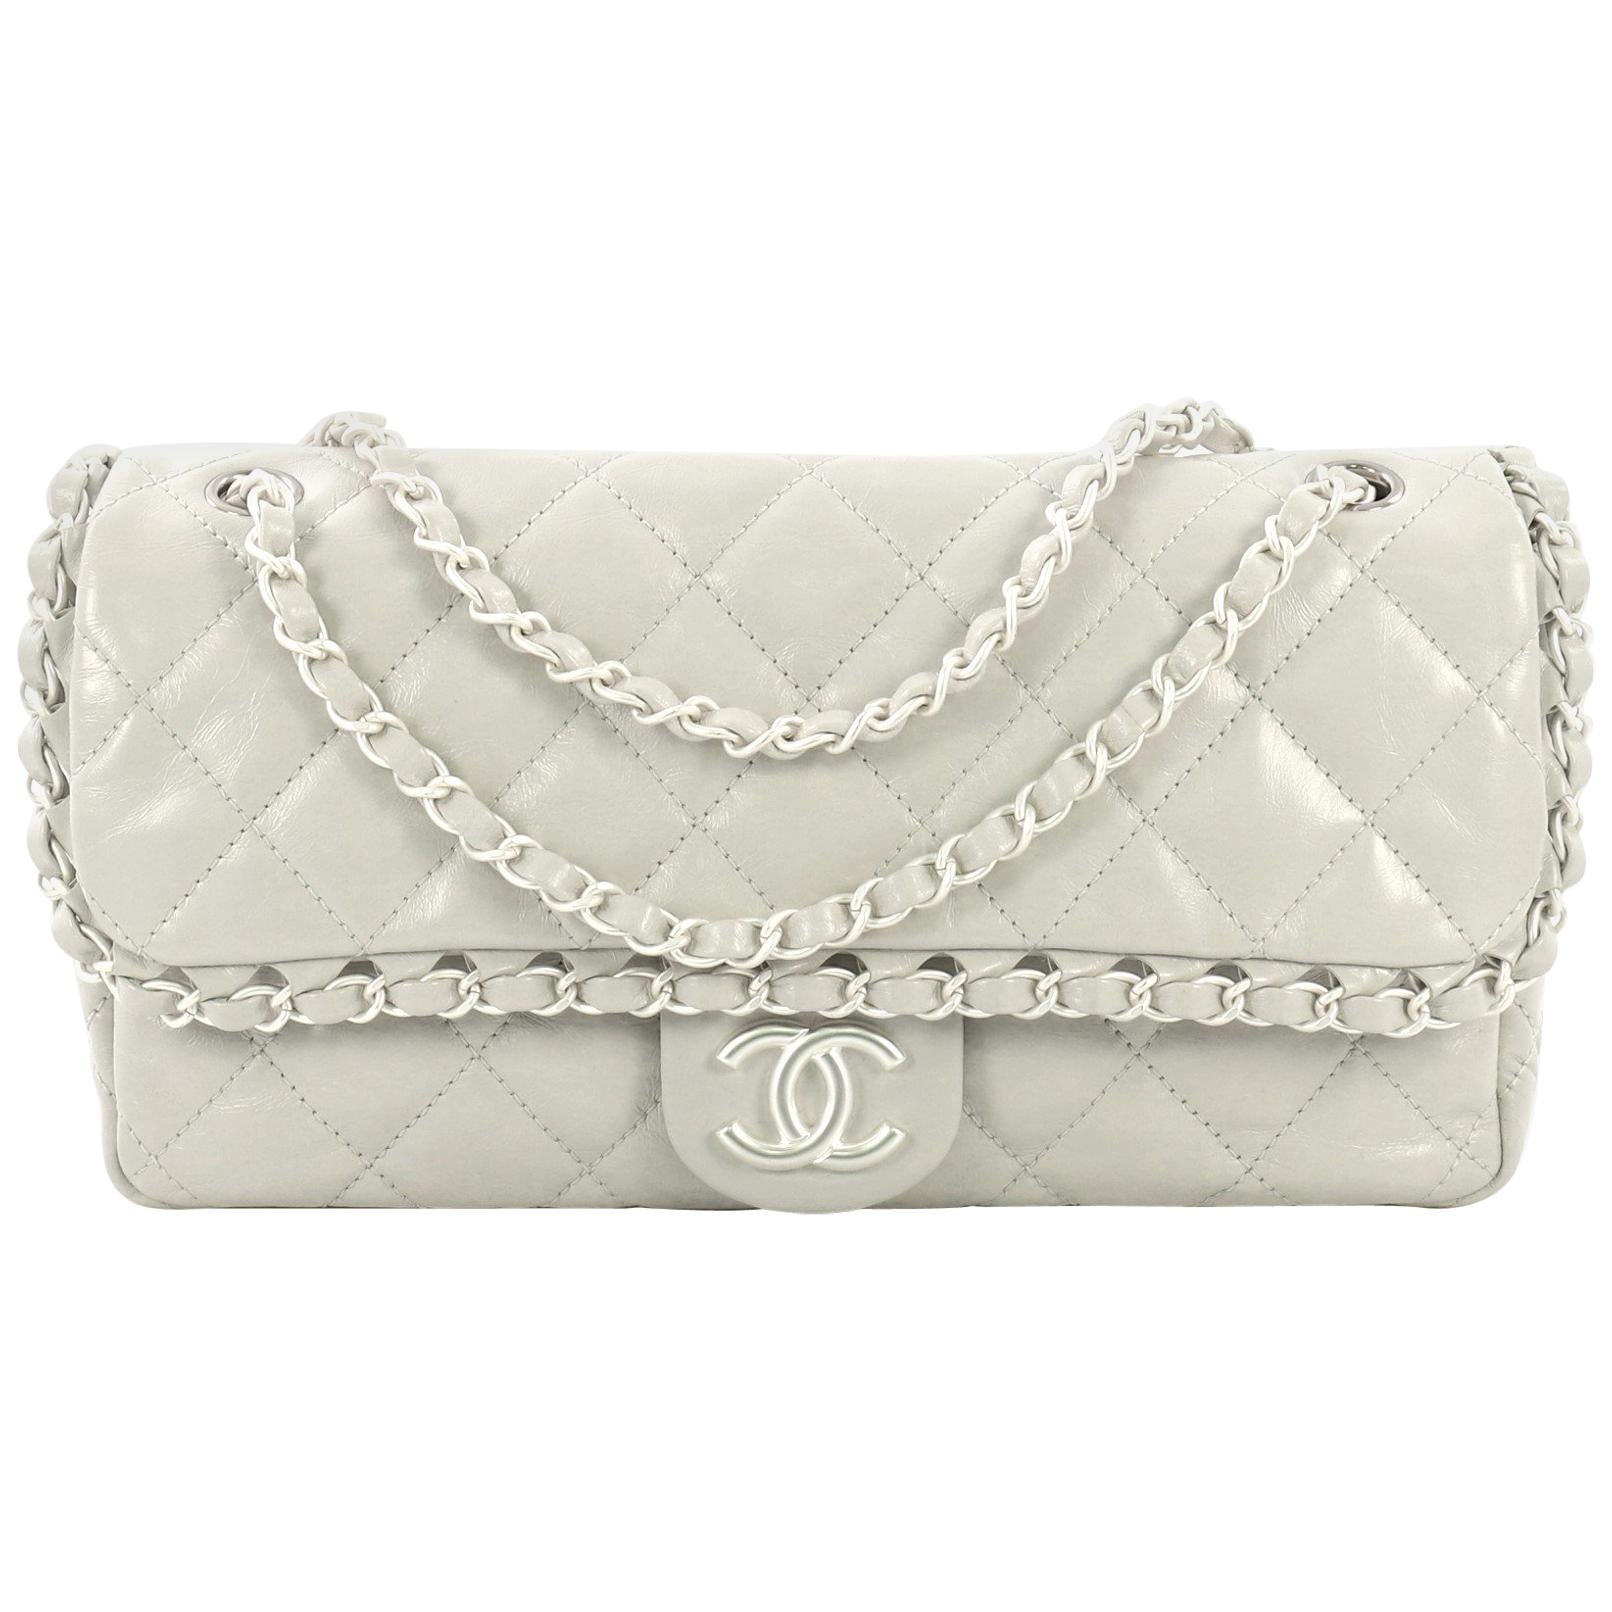 Chanel Chain Me Flap Bag Quilted Calfskin Jumbo